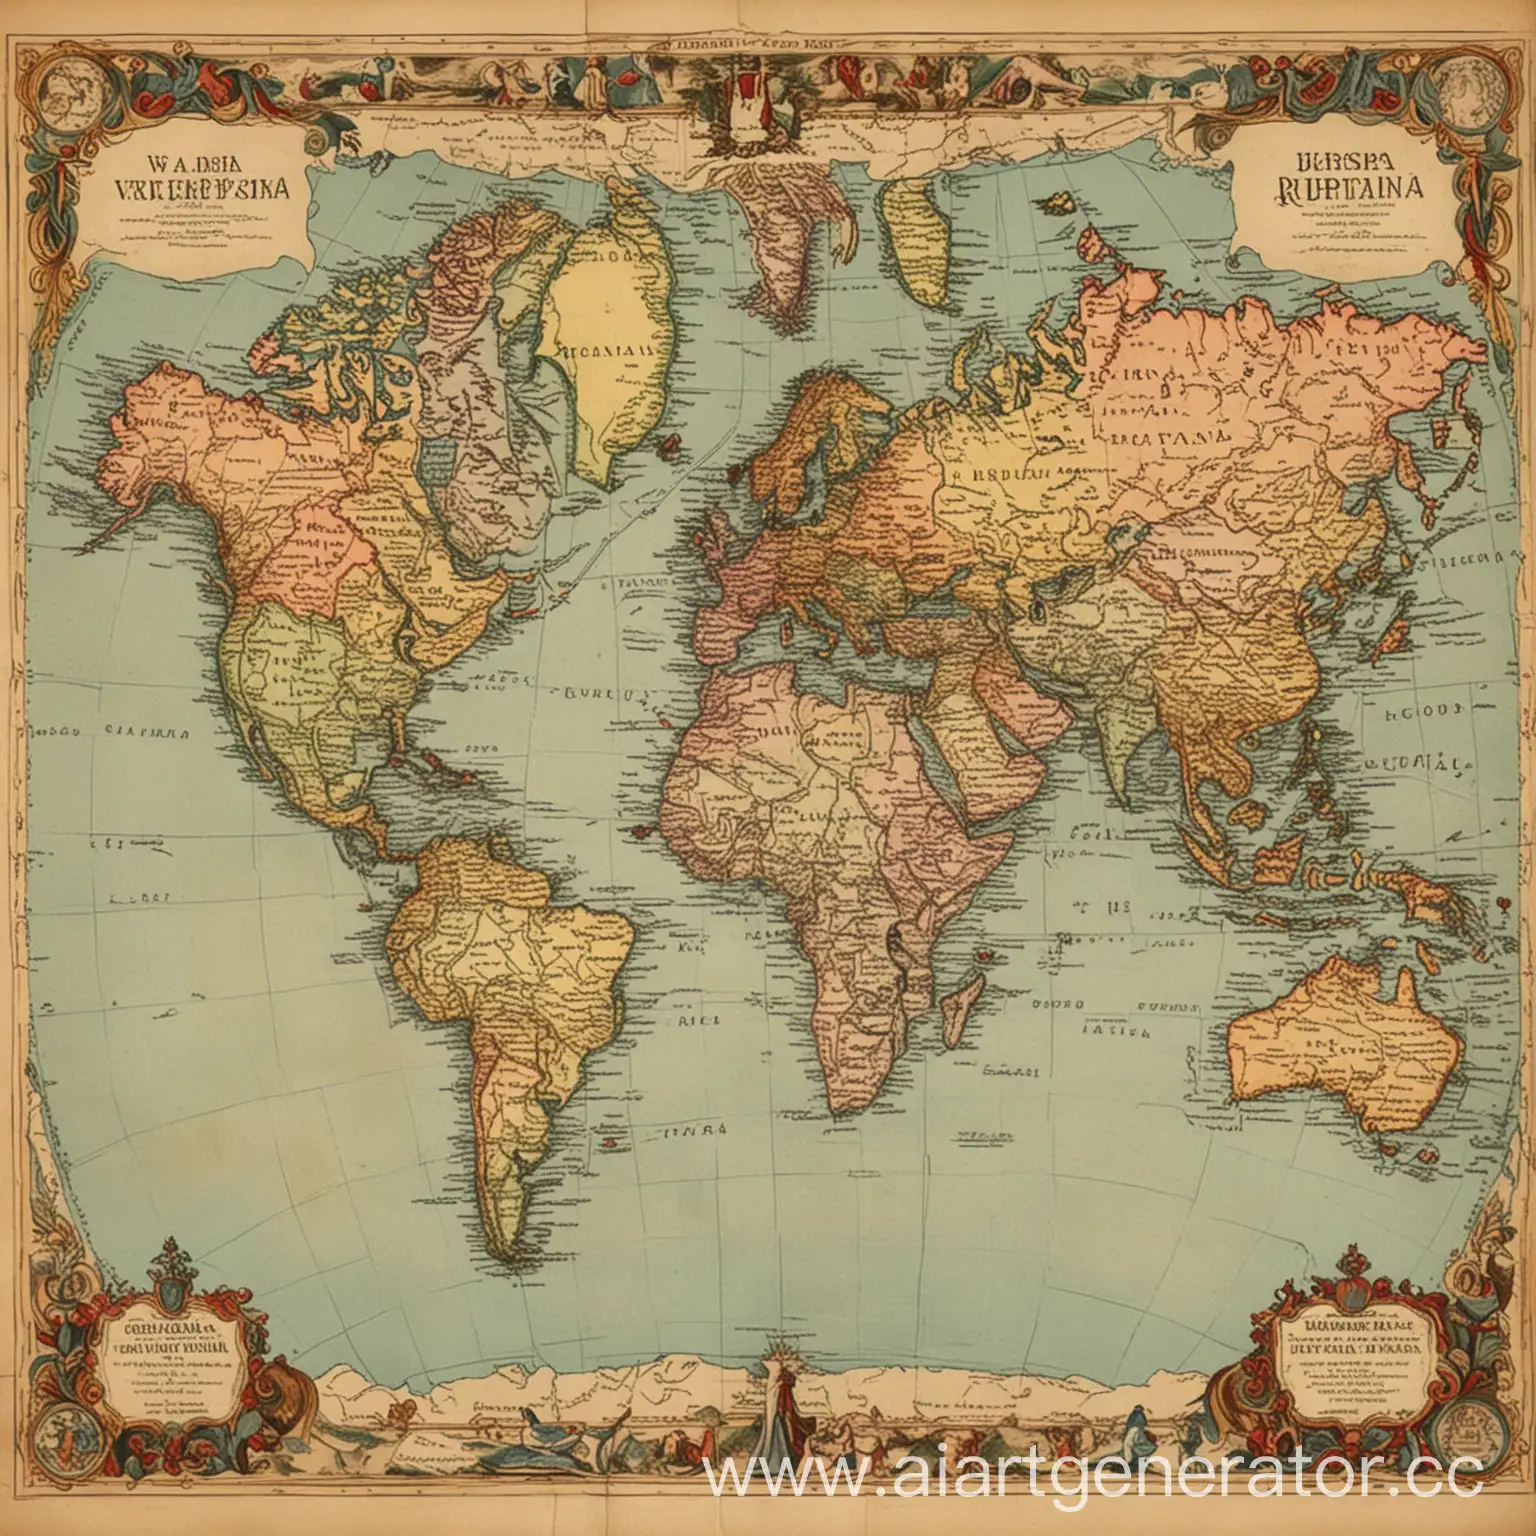 Map-of-the-World-Featuring-V-Utopia-and-Ruritania